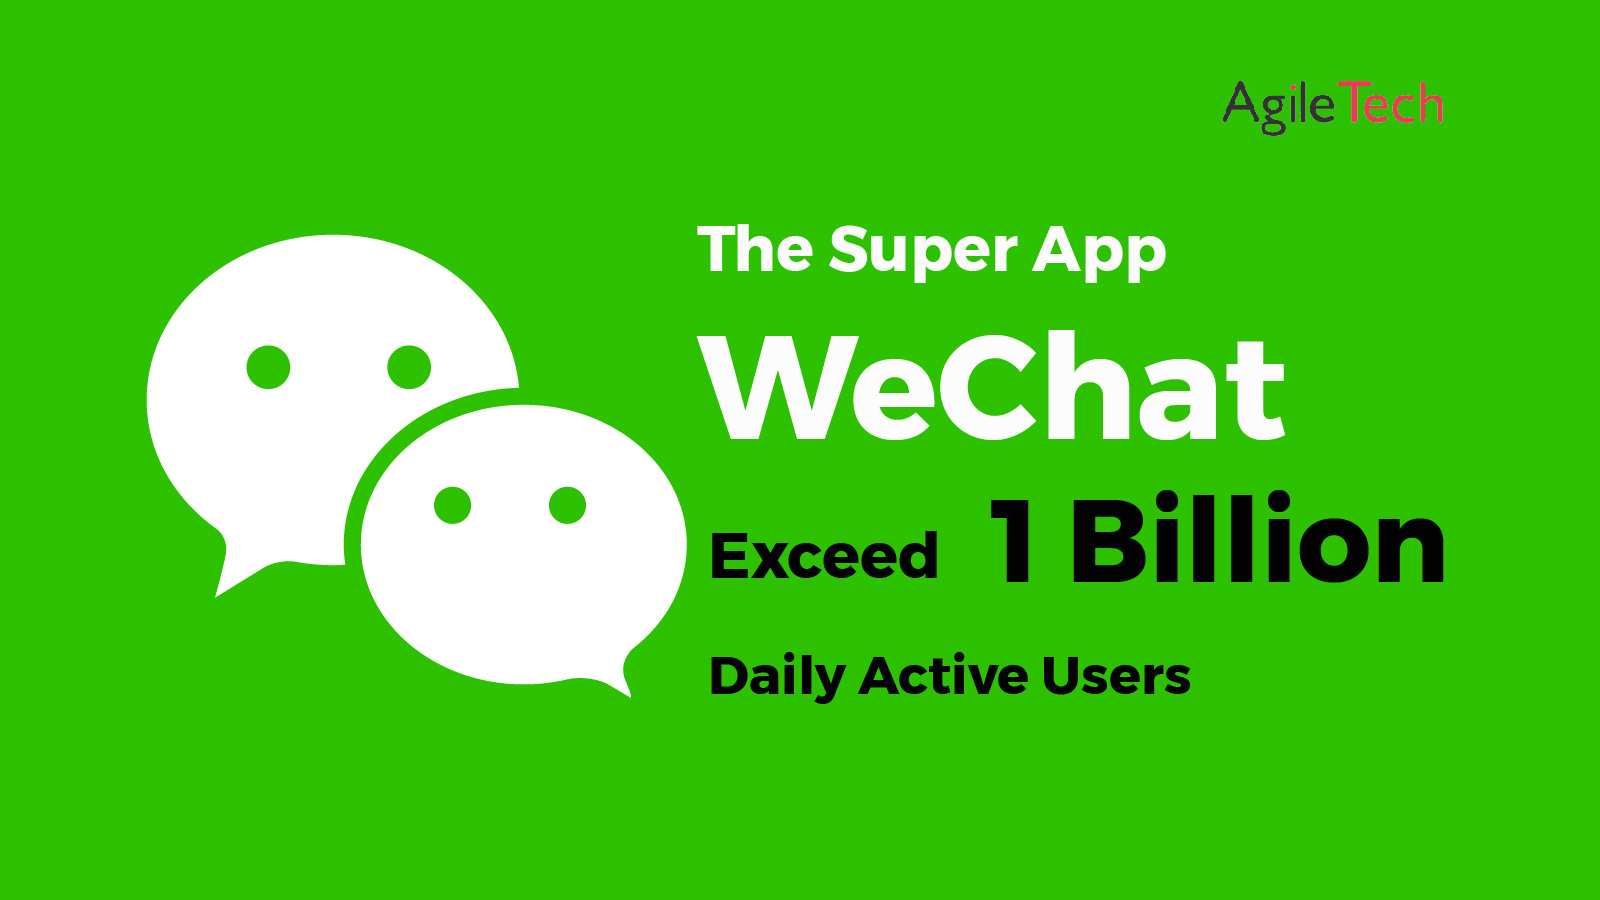 WECHAT: The Super App Exceed 1 Billion Daily Active Users